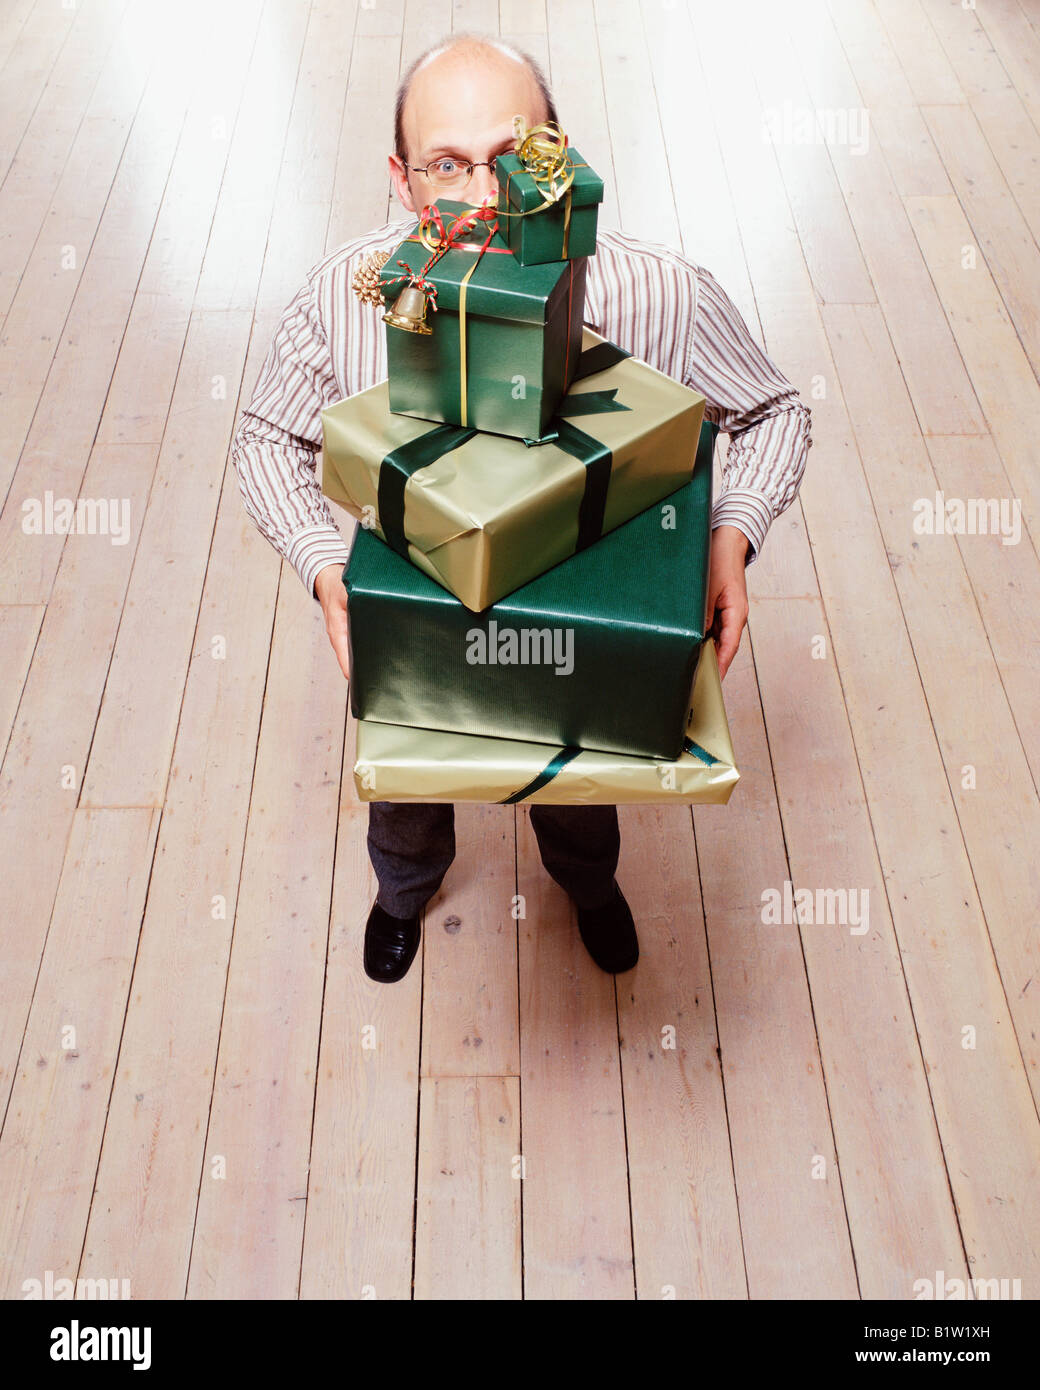 Man holding wrapped up gift Stock Photo